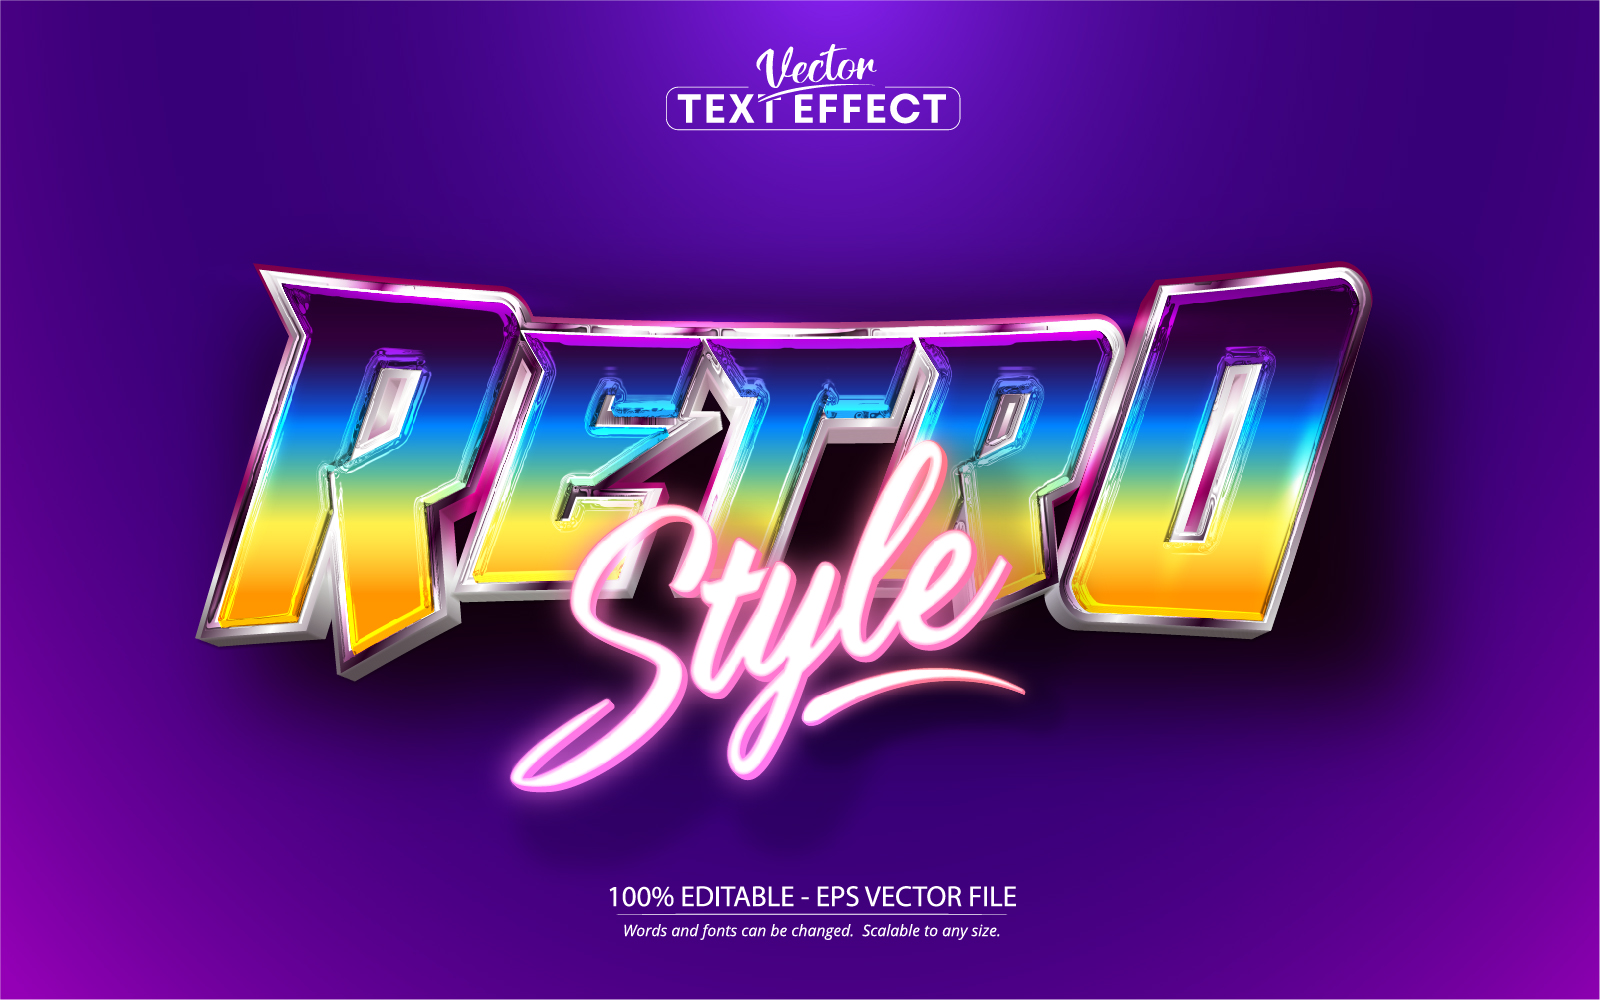 Retro Style - Editable Text Effect, Shiny Colorful Neon Light Text Style, Graphics Illustration